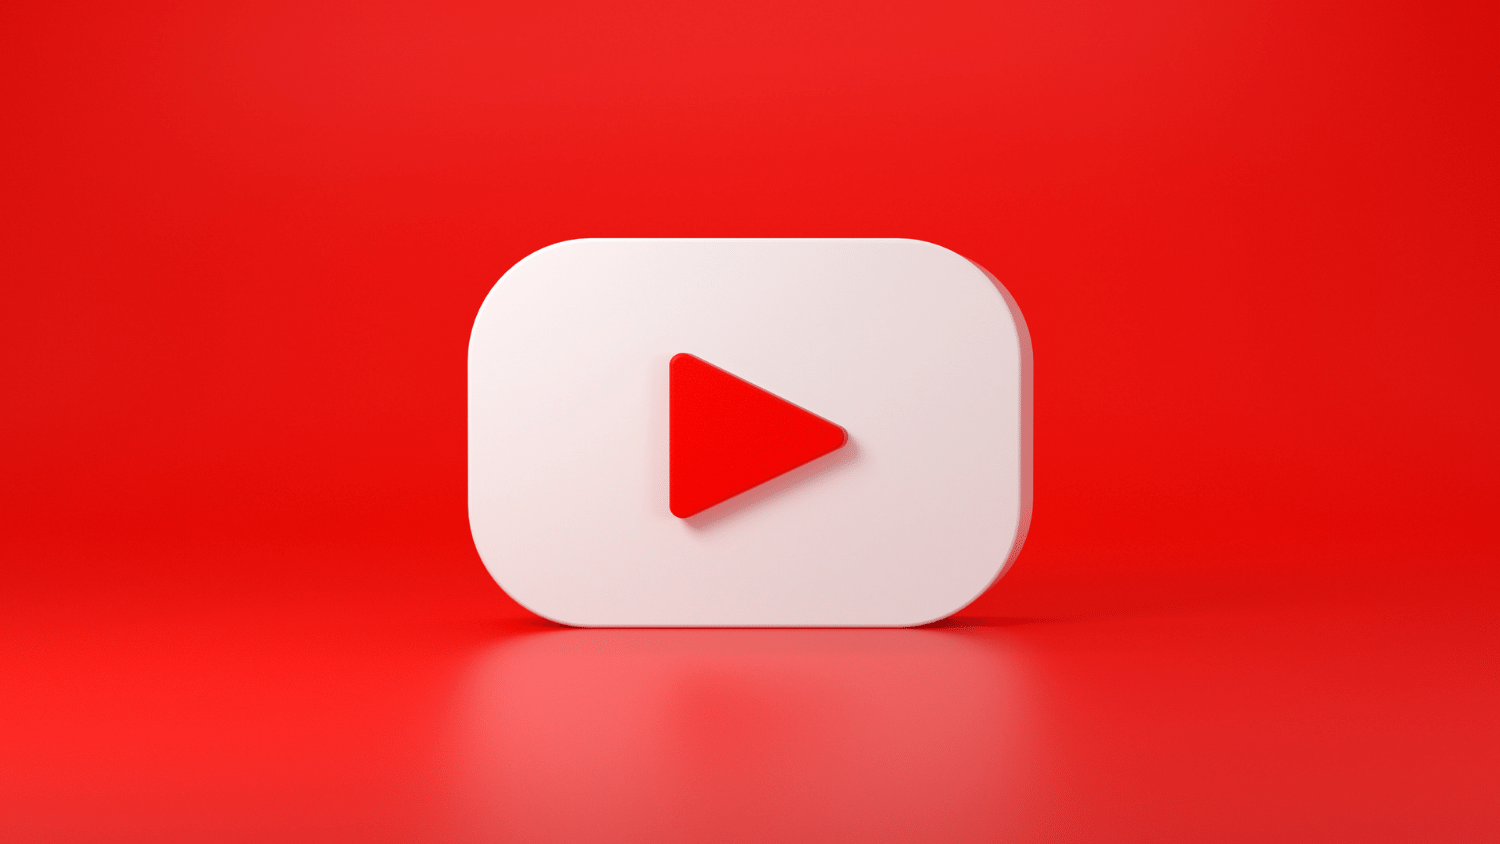 YouTube logo on a red background